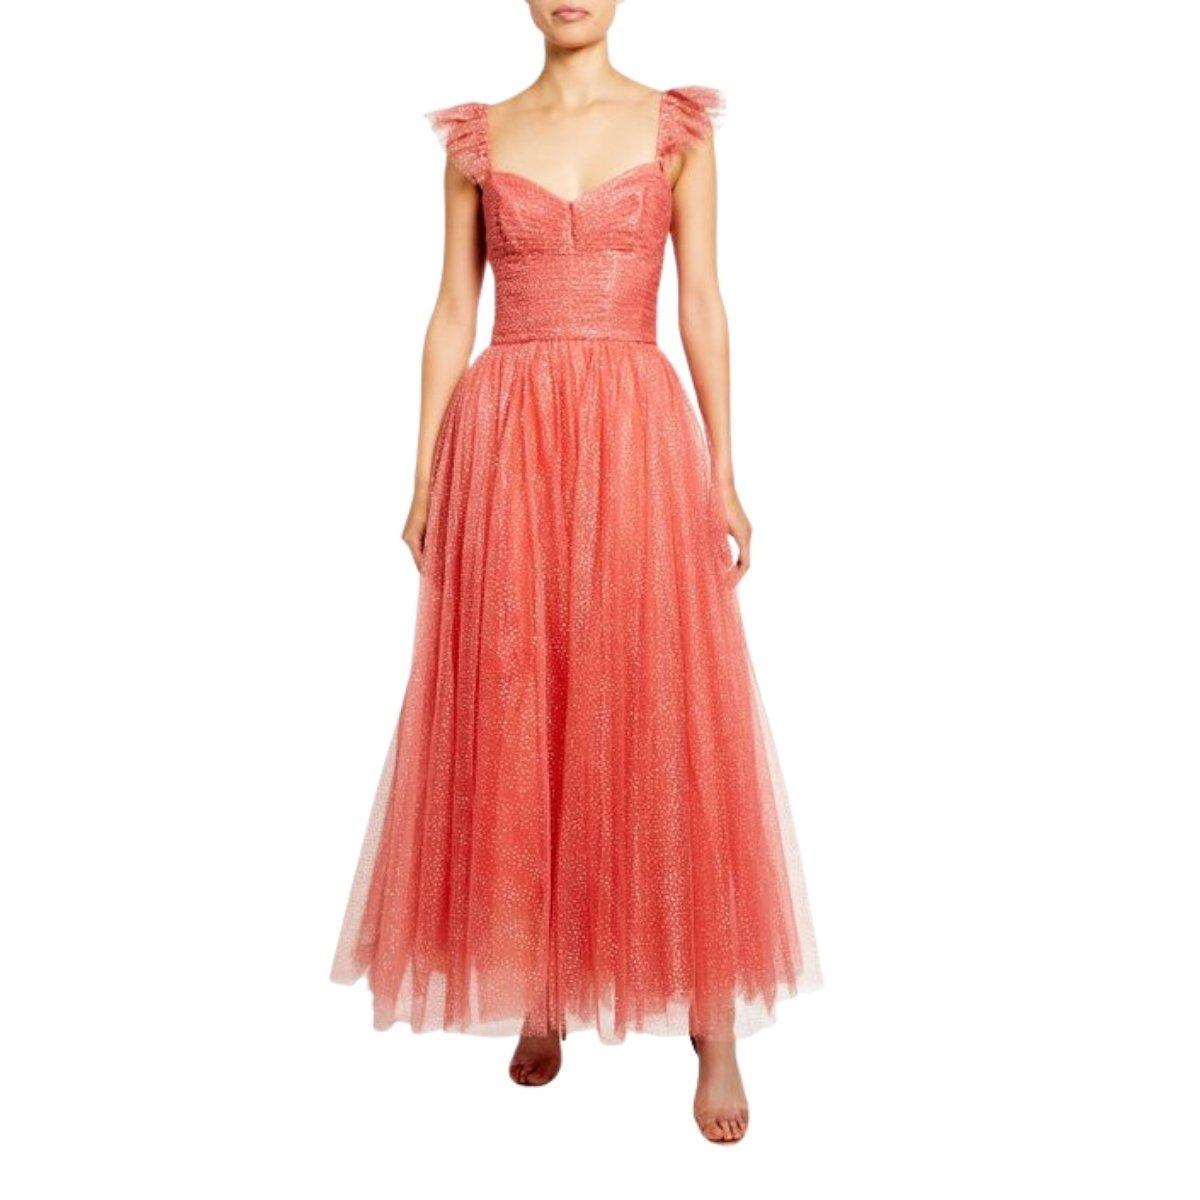 Monique Lhuillier's sleeveless tulle gown is designed with flutter straps, a sweetheart neckline and glitter throughout. Tailored to a maxi length, its ruched fitted bodice is complemented by a fluid A-line skirt
Coral tulle exterior
Coral silk